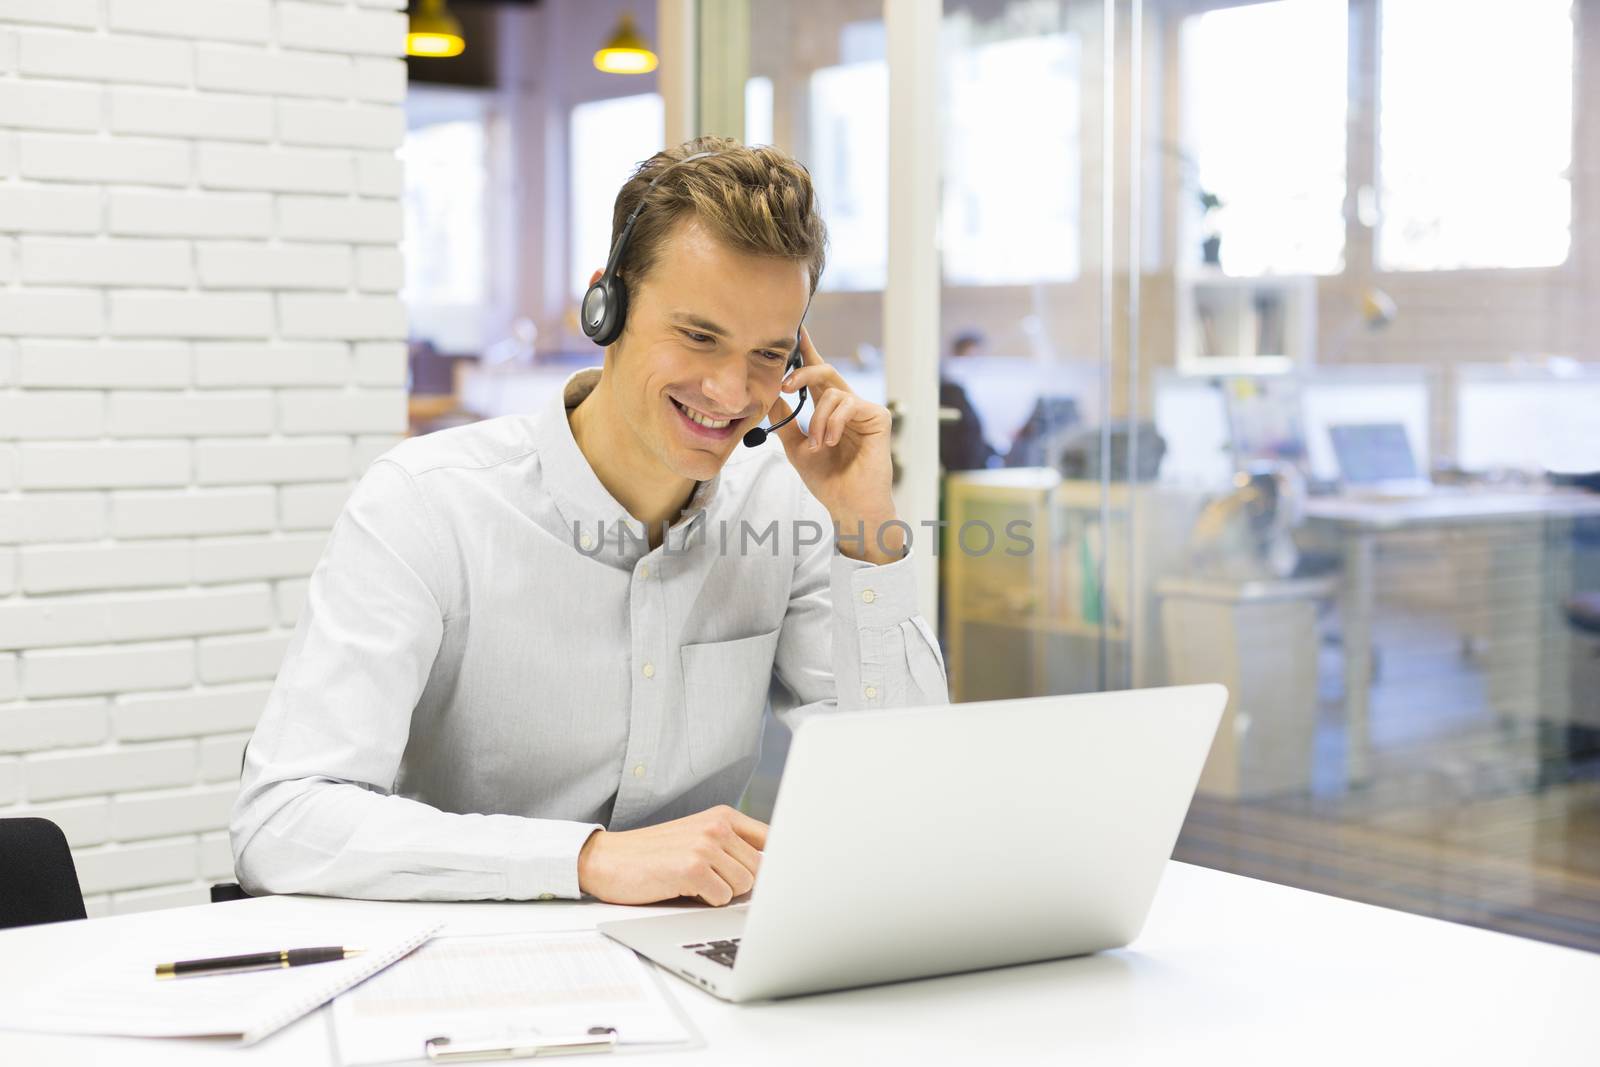 Businessman in the office on the phone with headset, Skype by LDProd